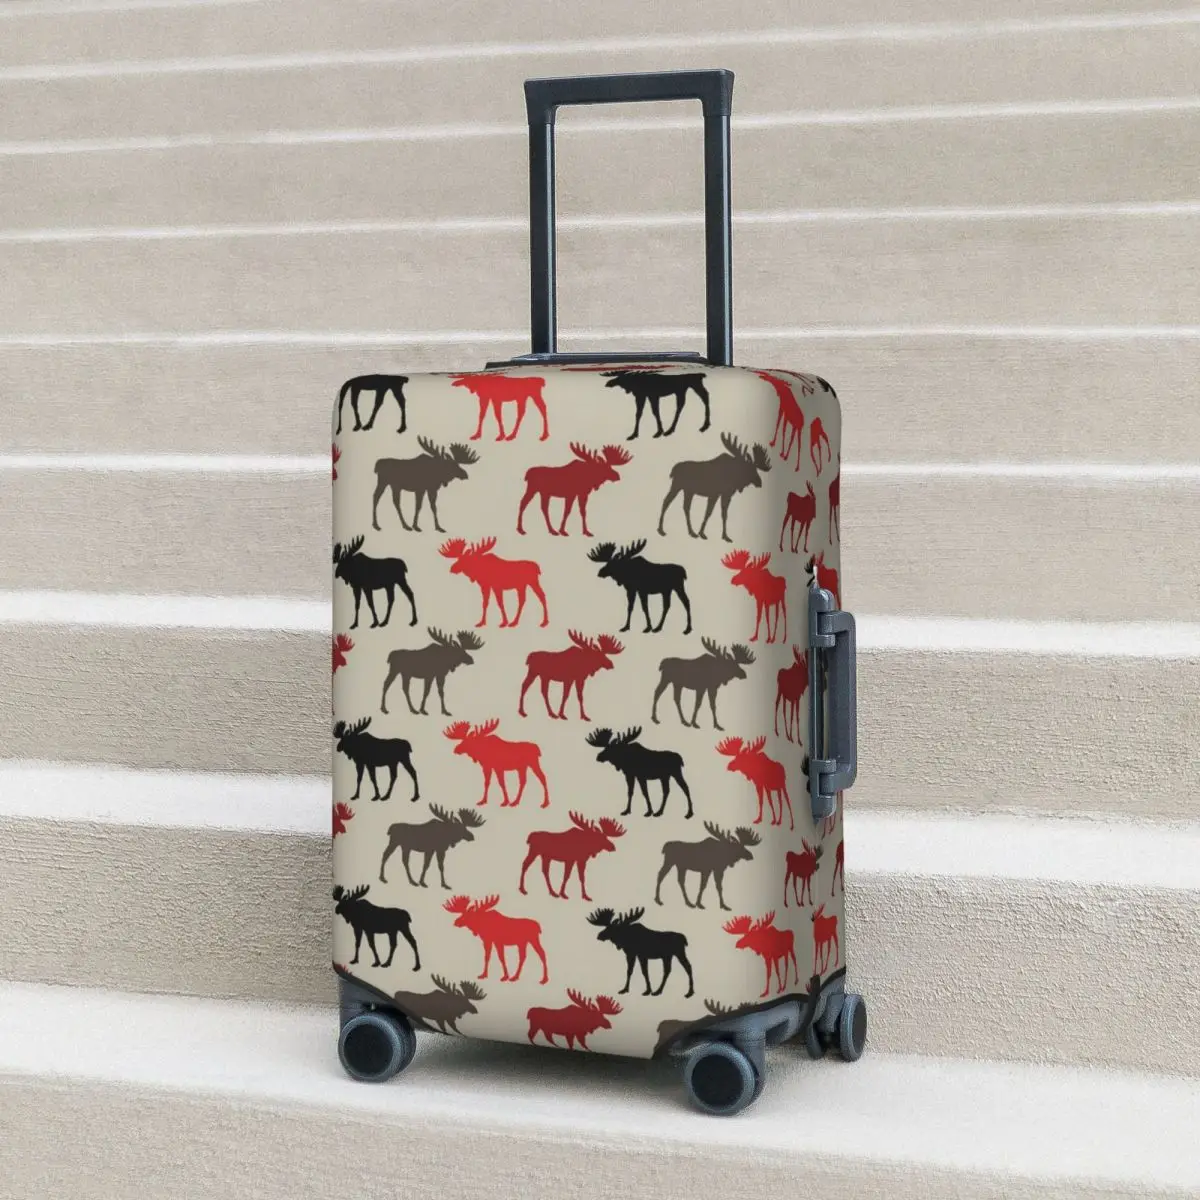 

Silhouette Deer Suitcase Cover Cute Animal Print Holiday Cruise Trip Elastic Luggage Supplies Protection